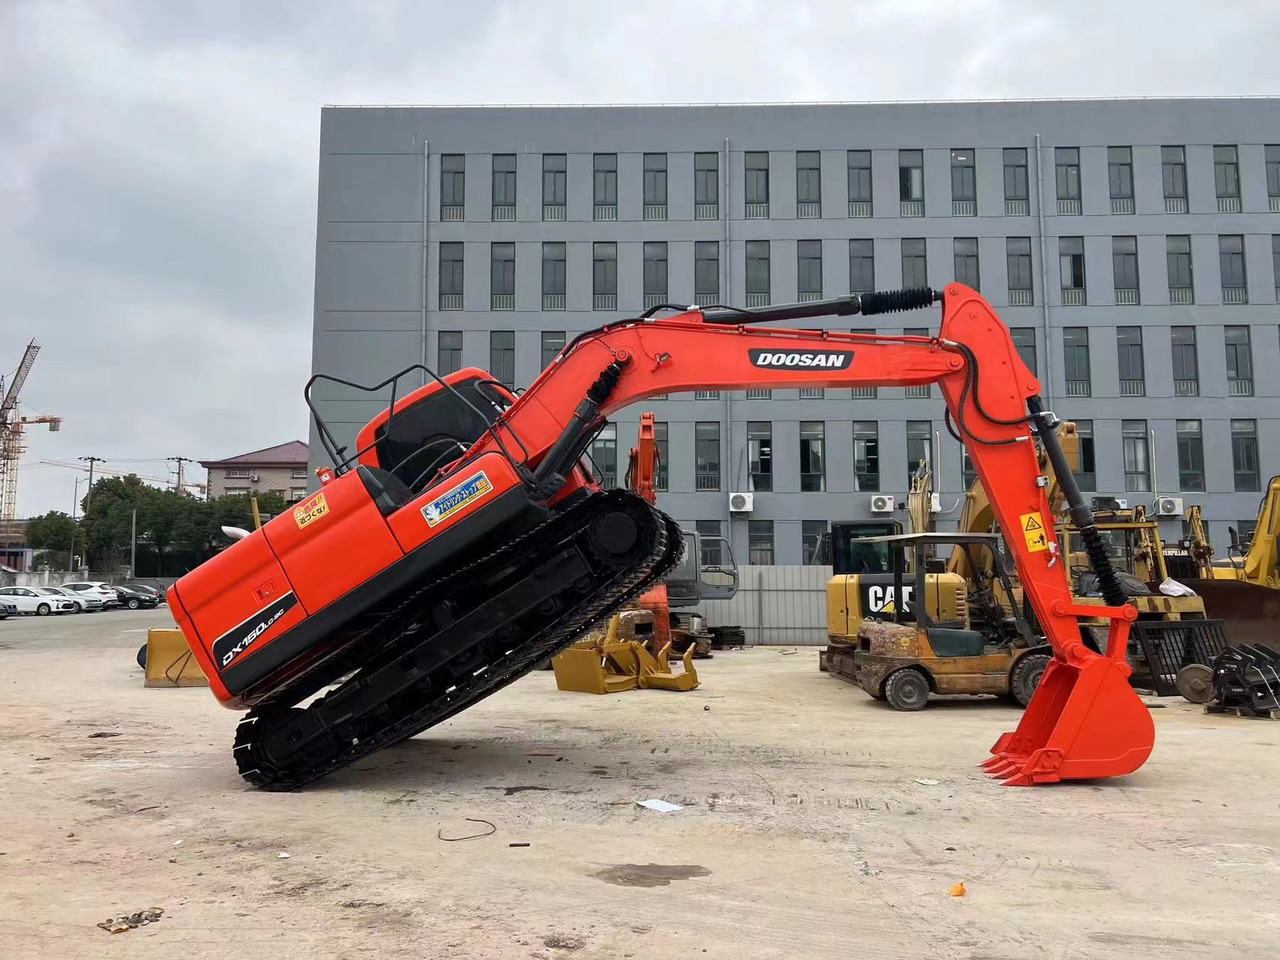 Kettenbagger Hot selling !!! High quality used excavator DOOSAN DX150LC-9 good condition in stock on sale: das Bild 3